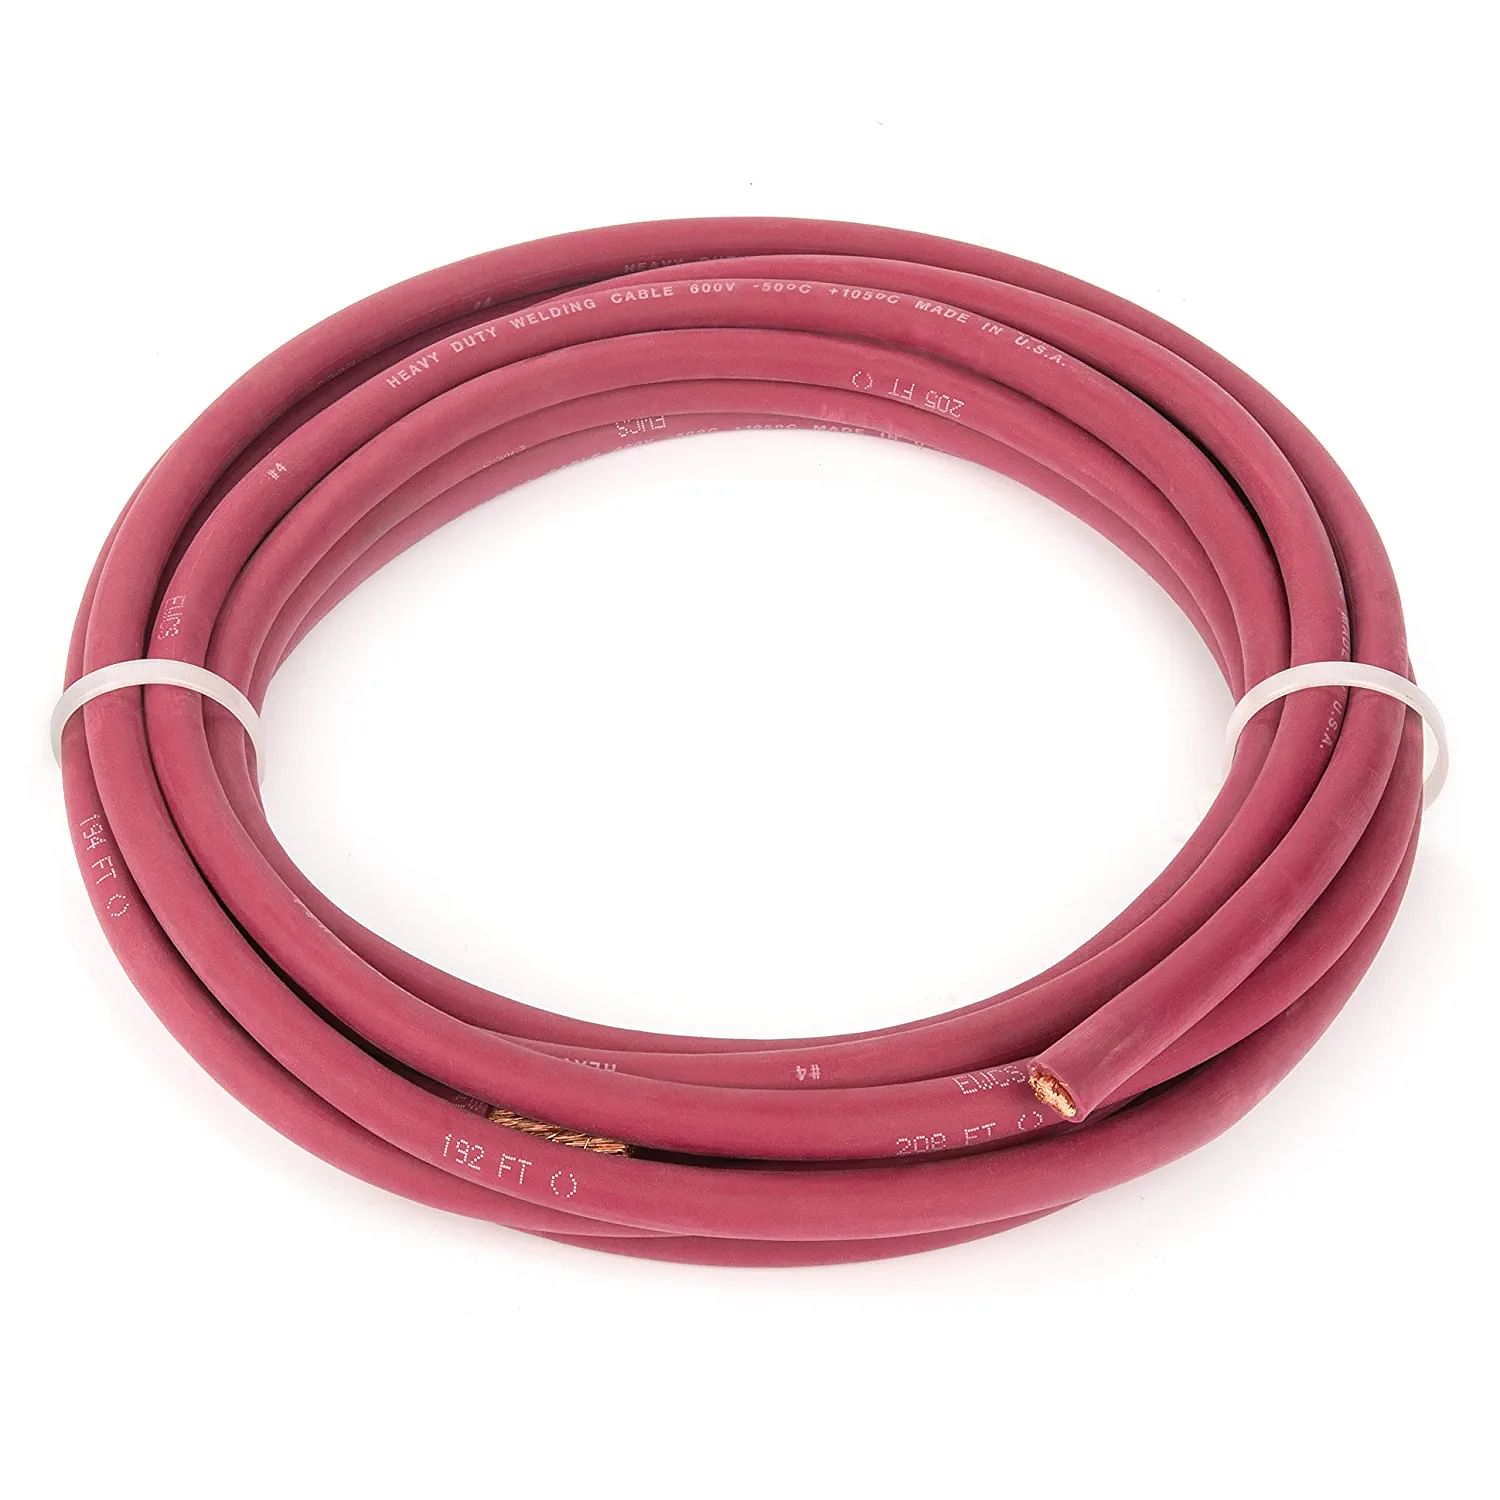 100/100V H01n2-D CE ROHS Certified 1X50mm2 IEC Standard Flexible Copper Conductor Welding Cable 